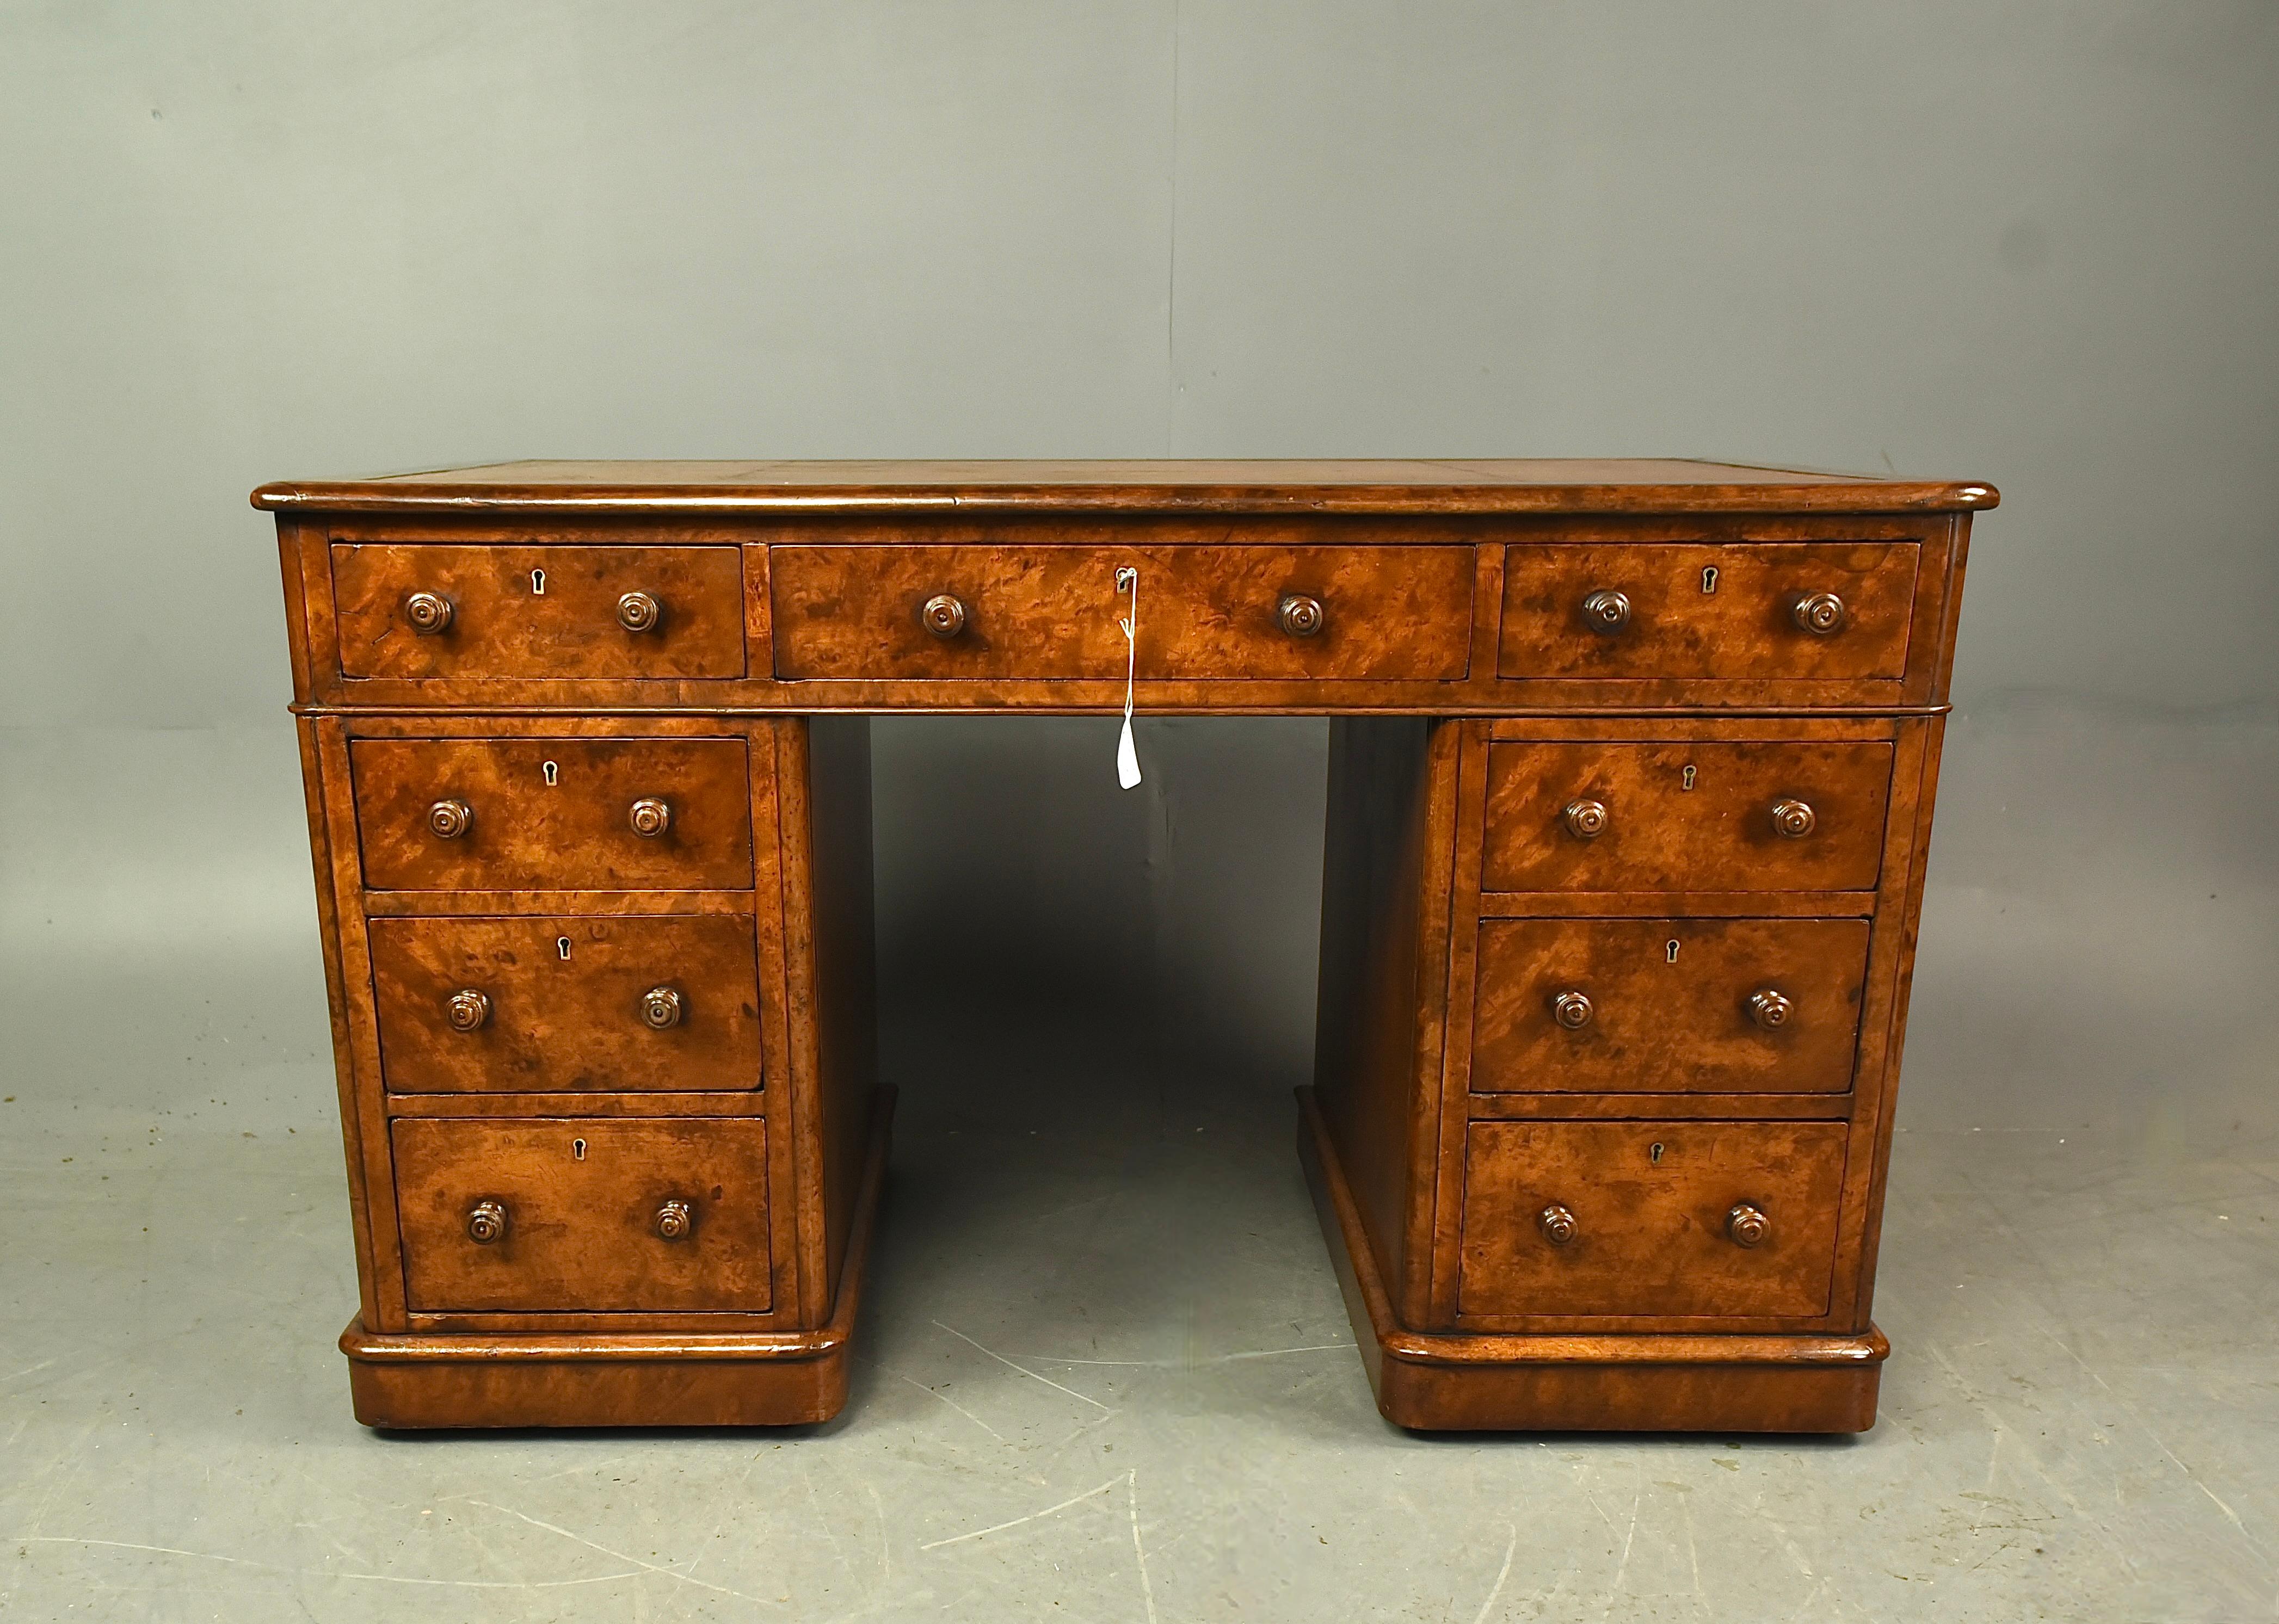 Fine quality Victorian burl walnut pedestal desk circa 1870 .
The desk has a fantastic grain and colour with a wonderful patina .
It has 9 hand dovetailed mahogany lined drawers ,The central top drawer has a working lock and key .
The top has a